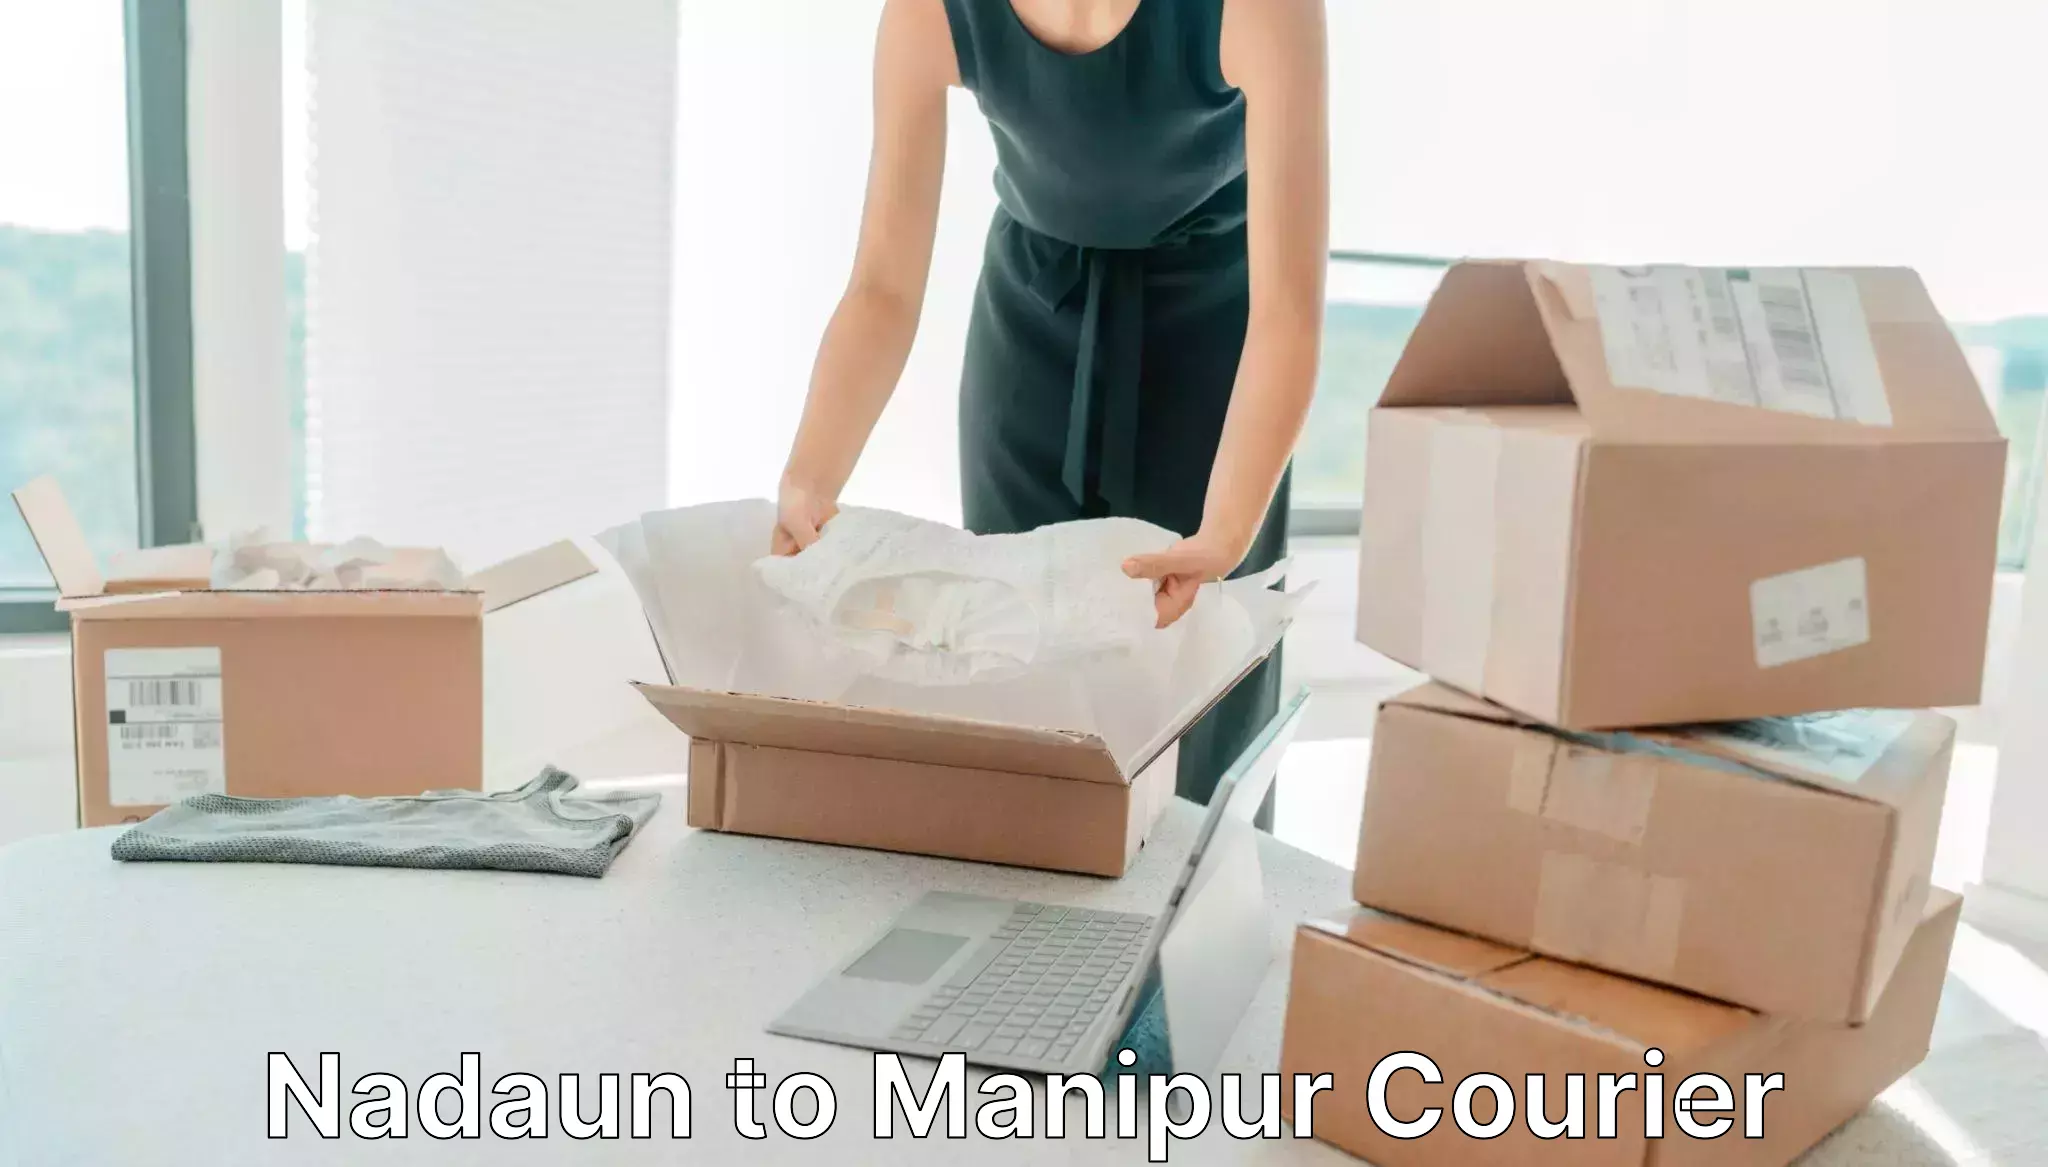 Speedy delivery service Nadaun to Manipur